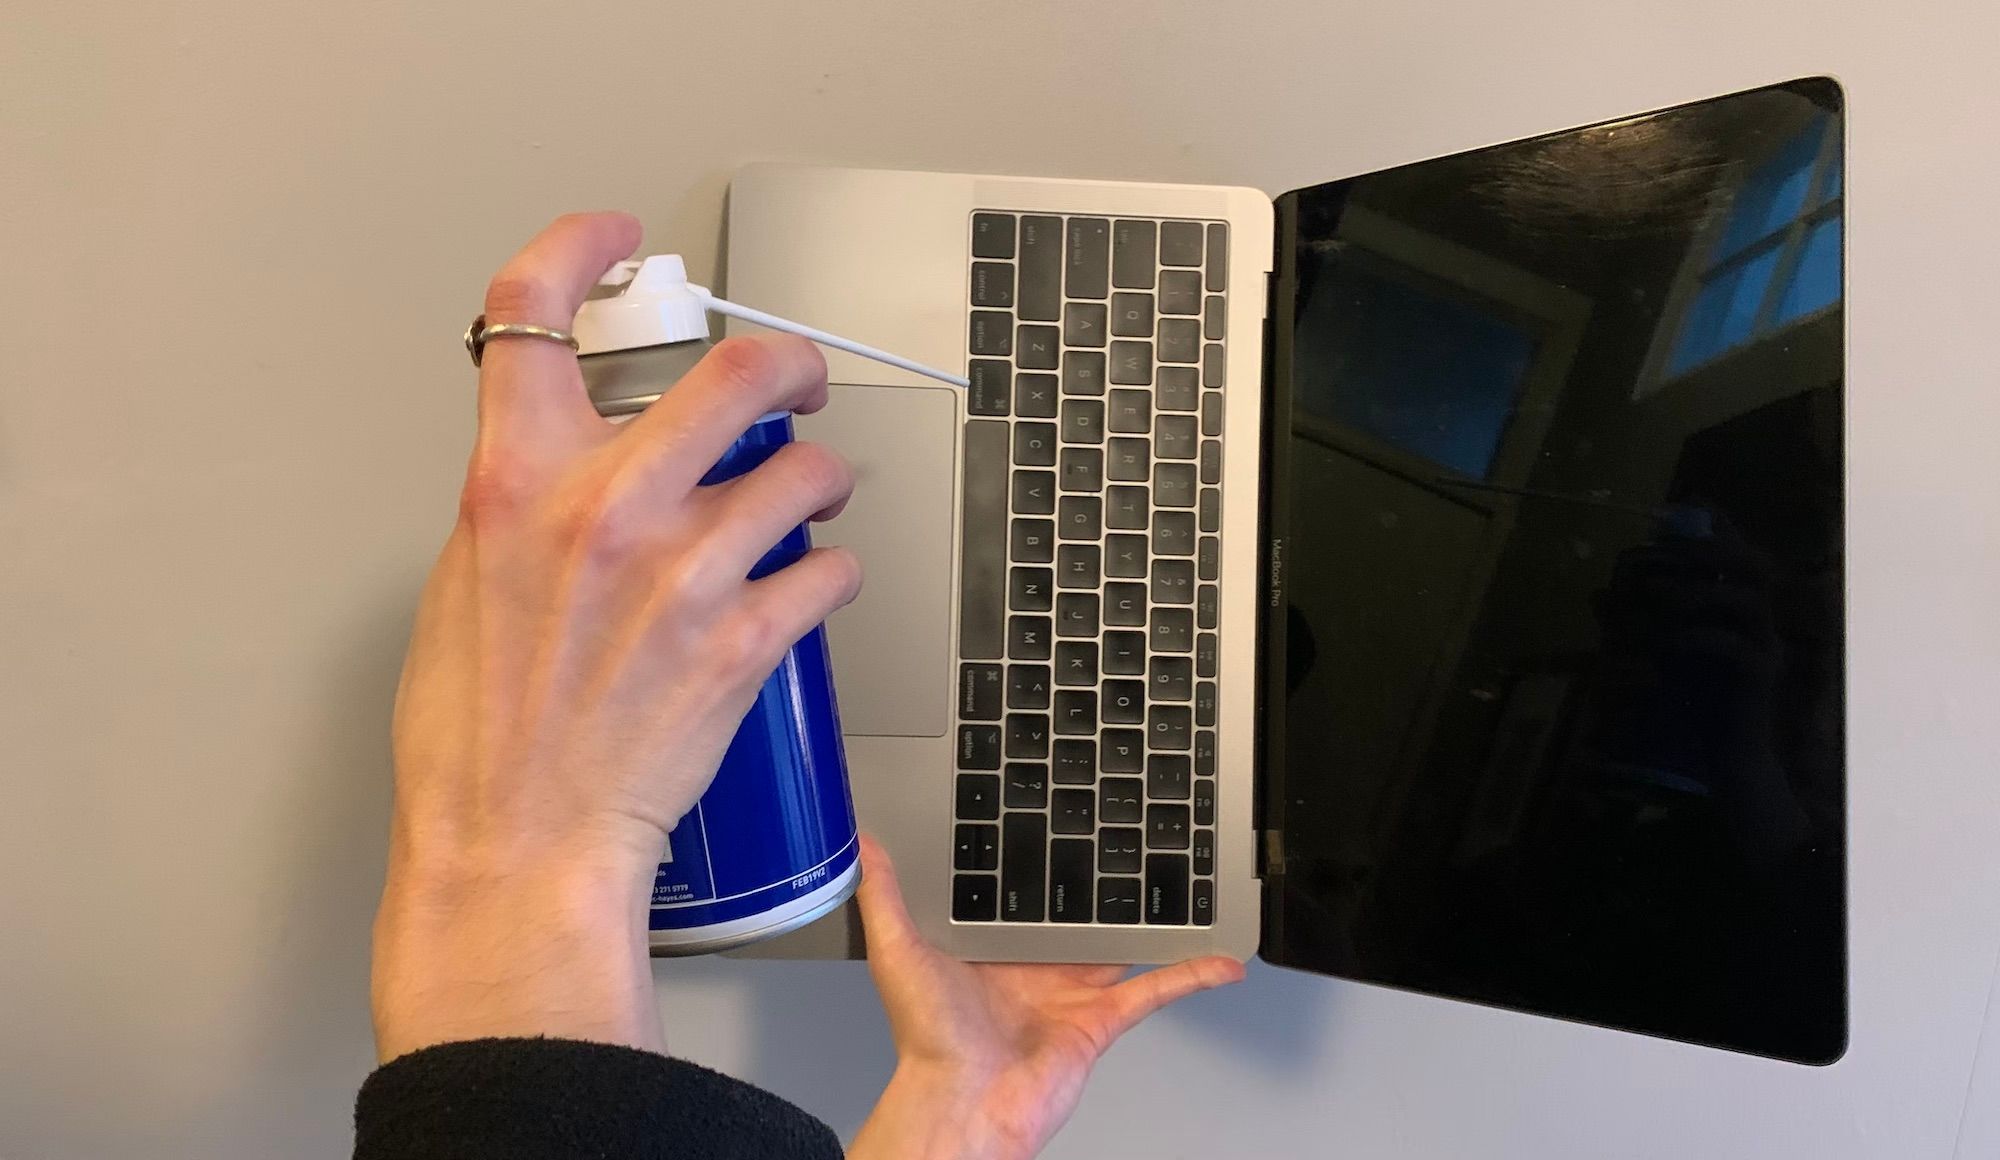 A hand holding an open macbook in the air, rotated 90 degrees to the right, with a hand pointing a compressed air can at the keyboard